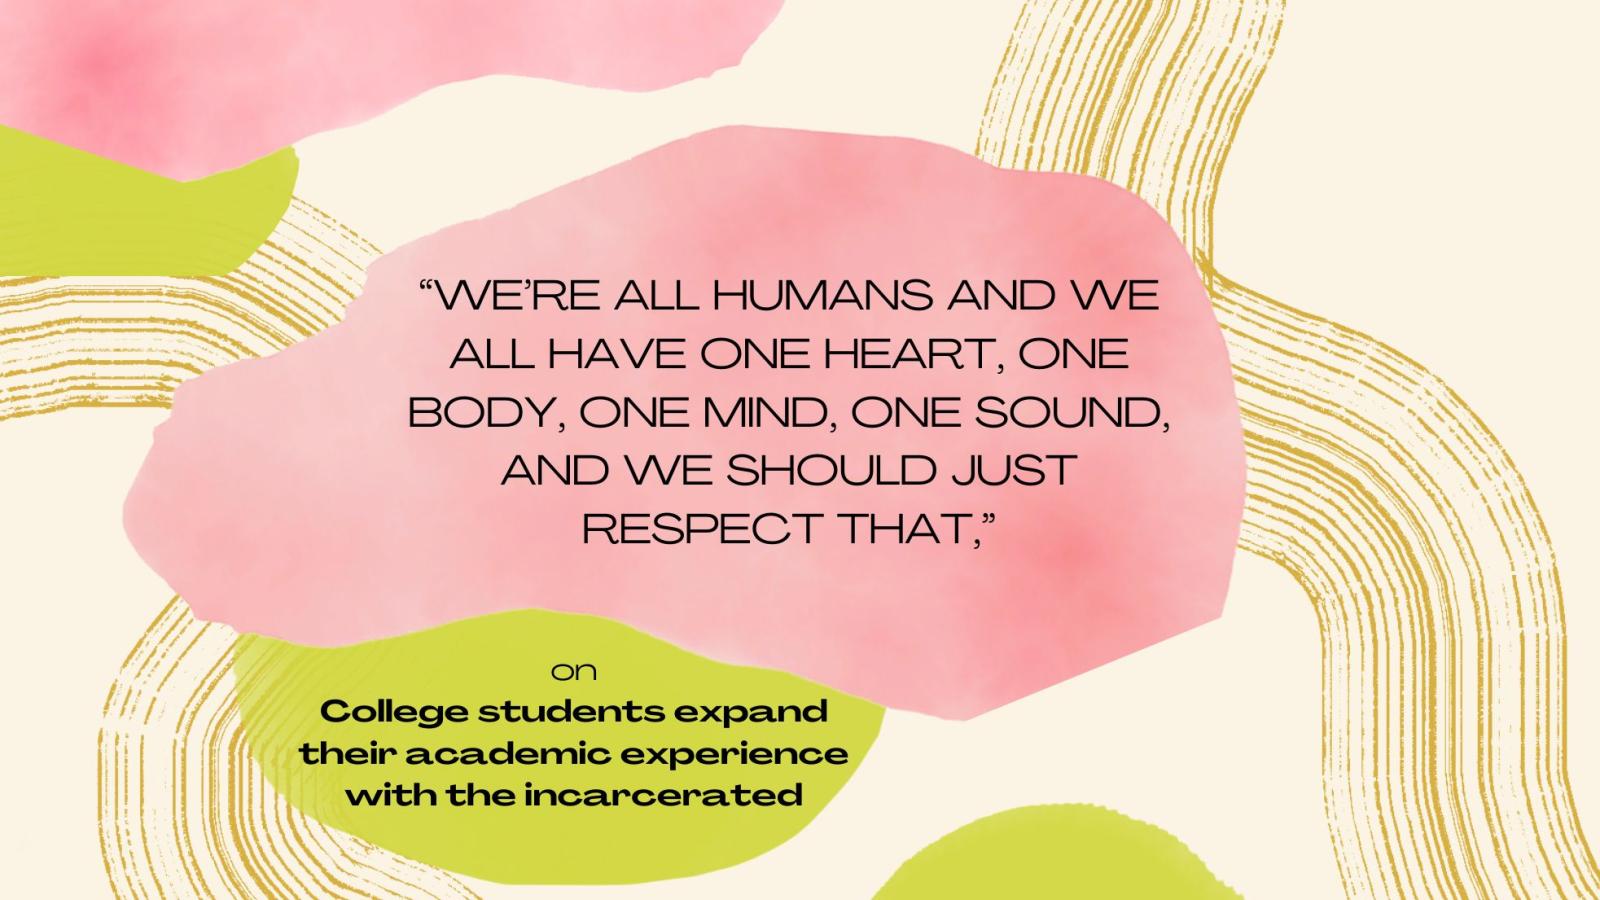 OPEEP is on NBC slide with text “We’re all humans and we all have one heart, one body, one mind, one sound, and we should just respect that,”